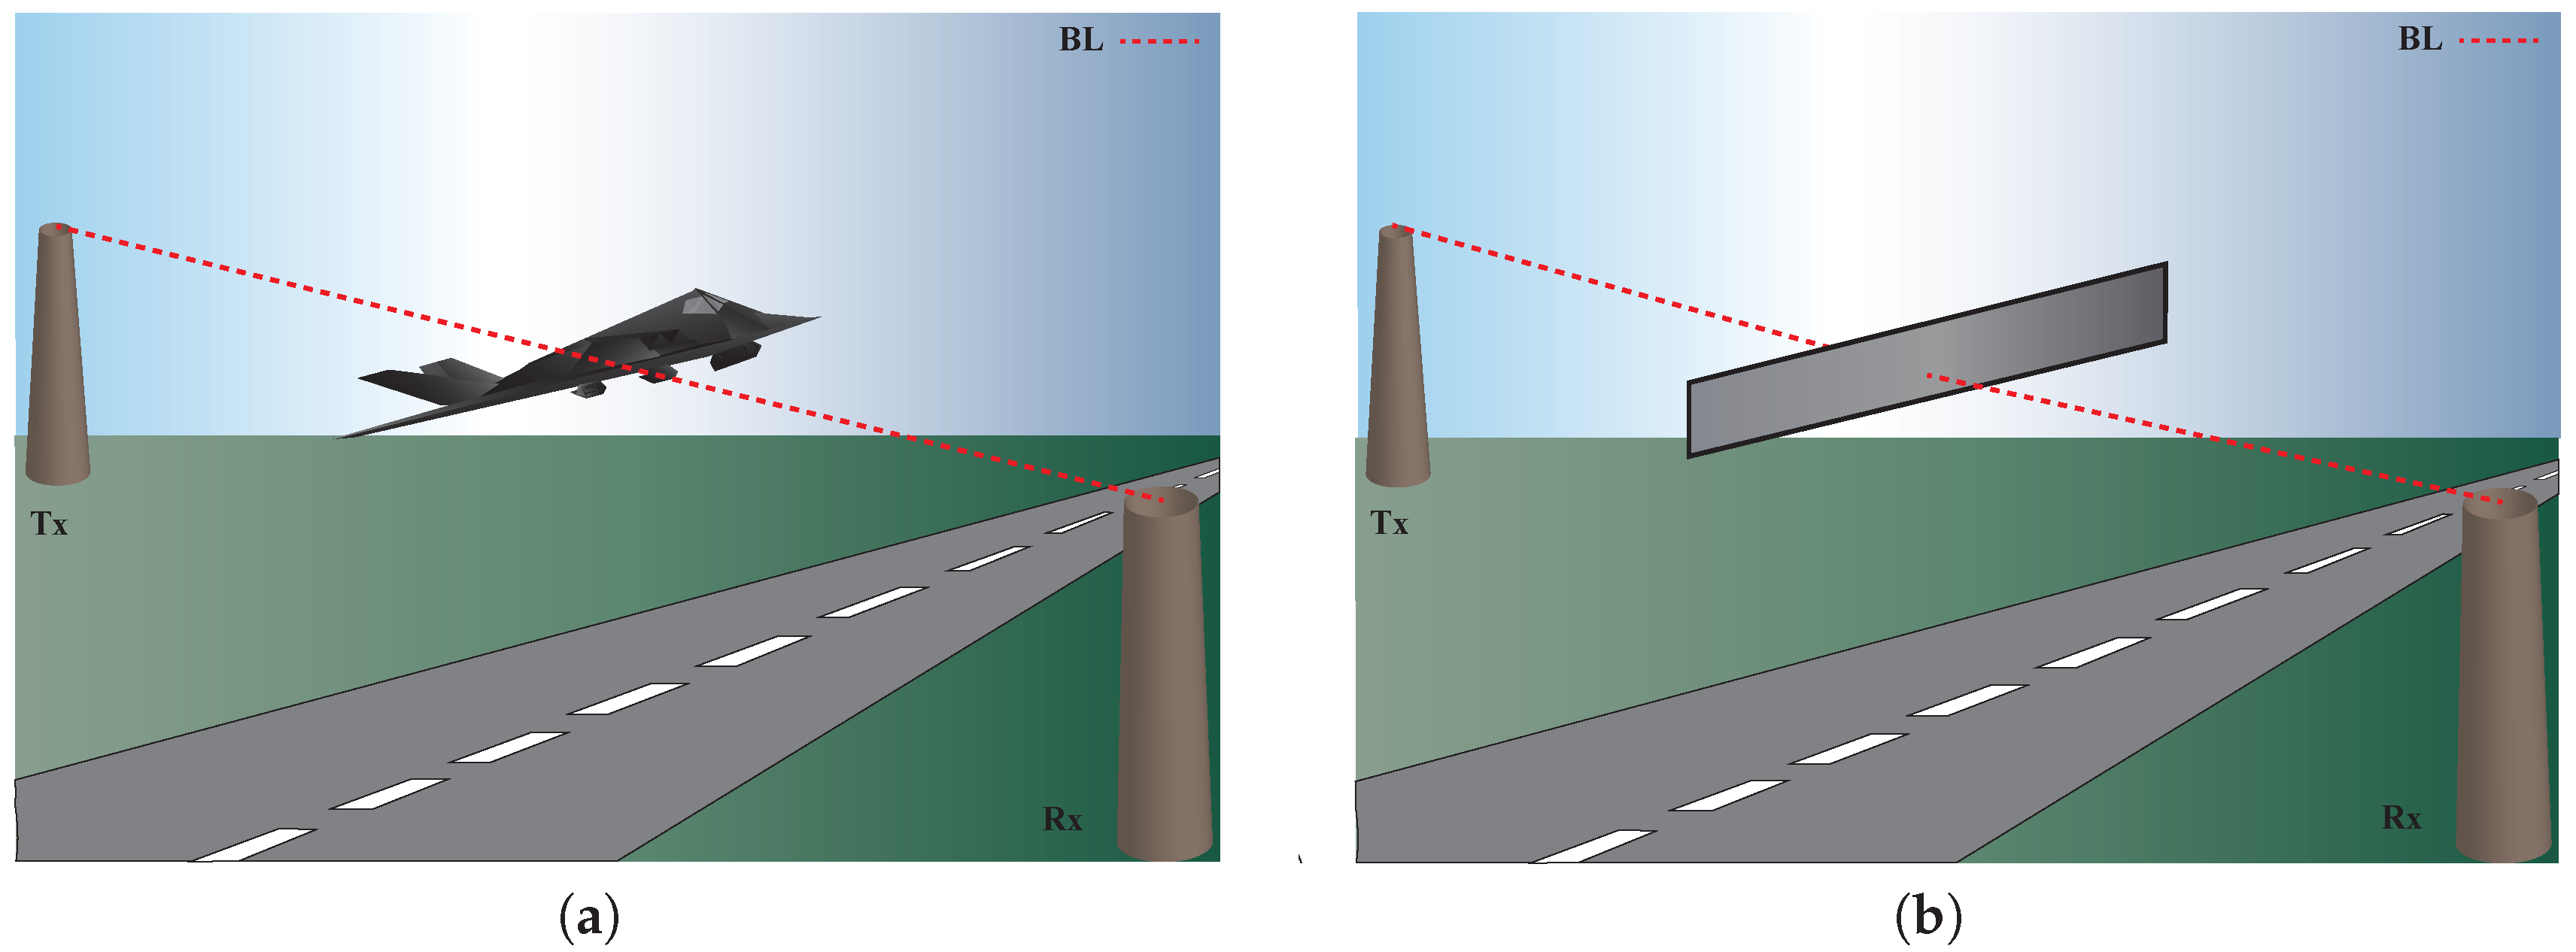 Remote Sensing | Free Full-Text | Forward Scatter Radar for Air  Surveillance: Characterizing the Target-Receiver Transition from Far-Field  to Near-Field Regions